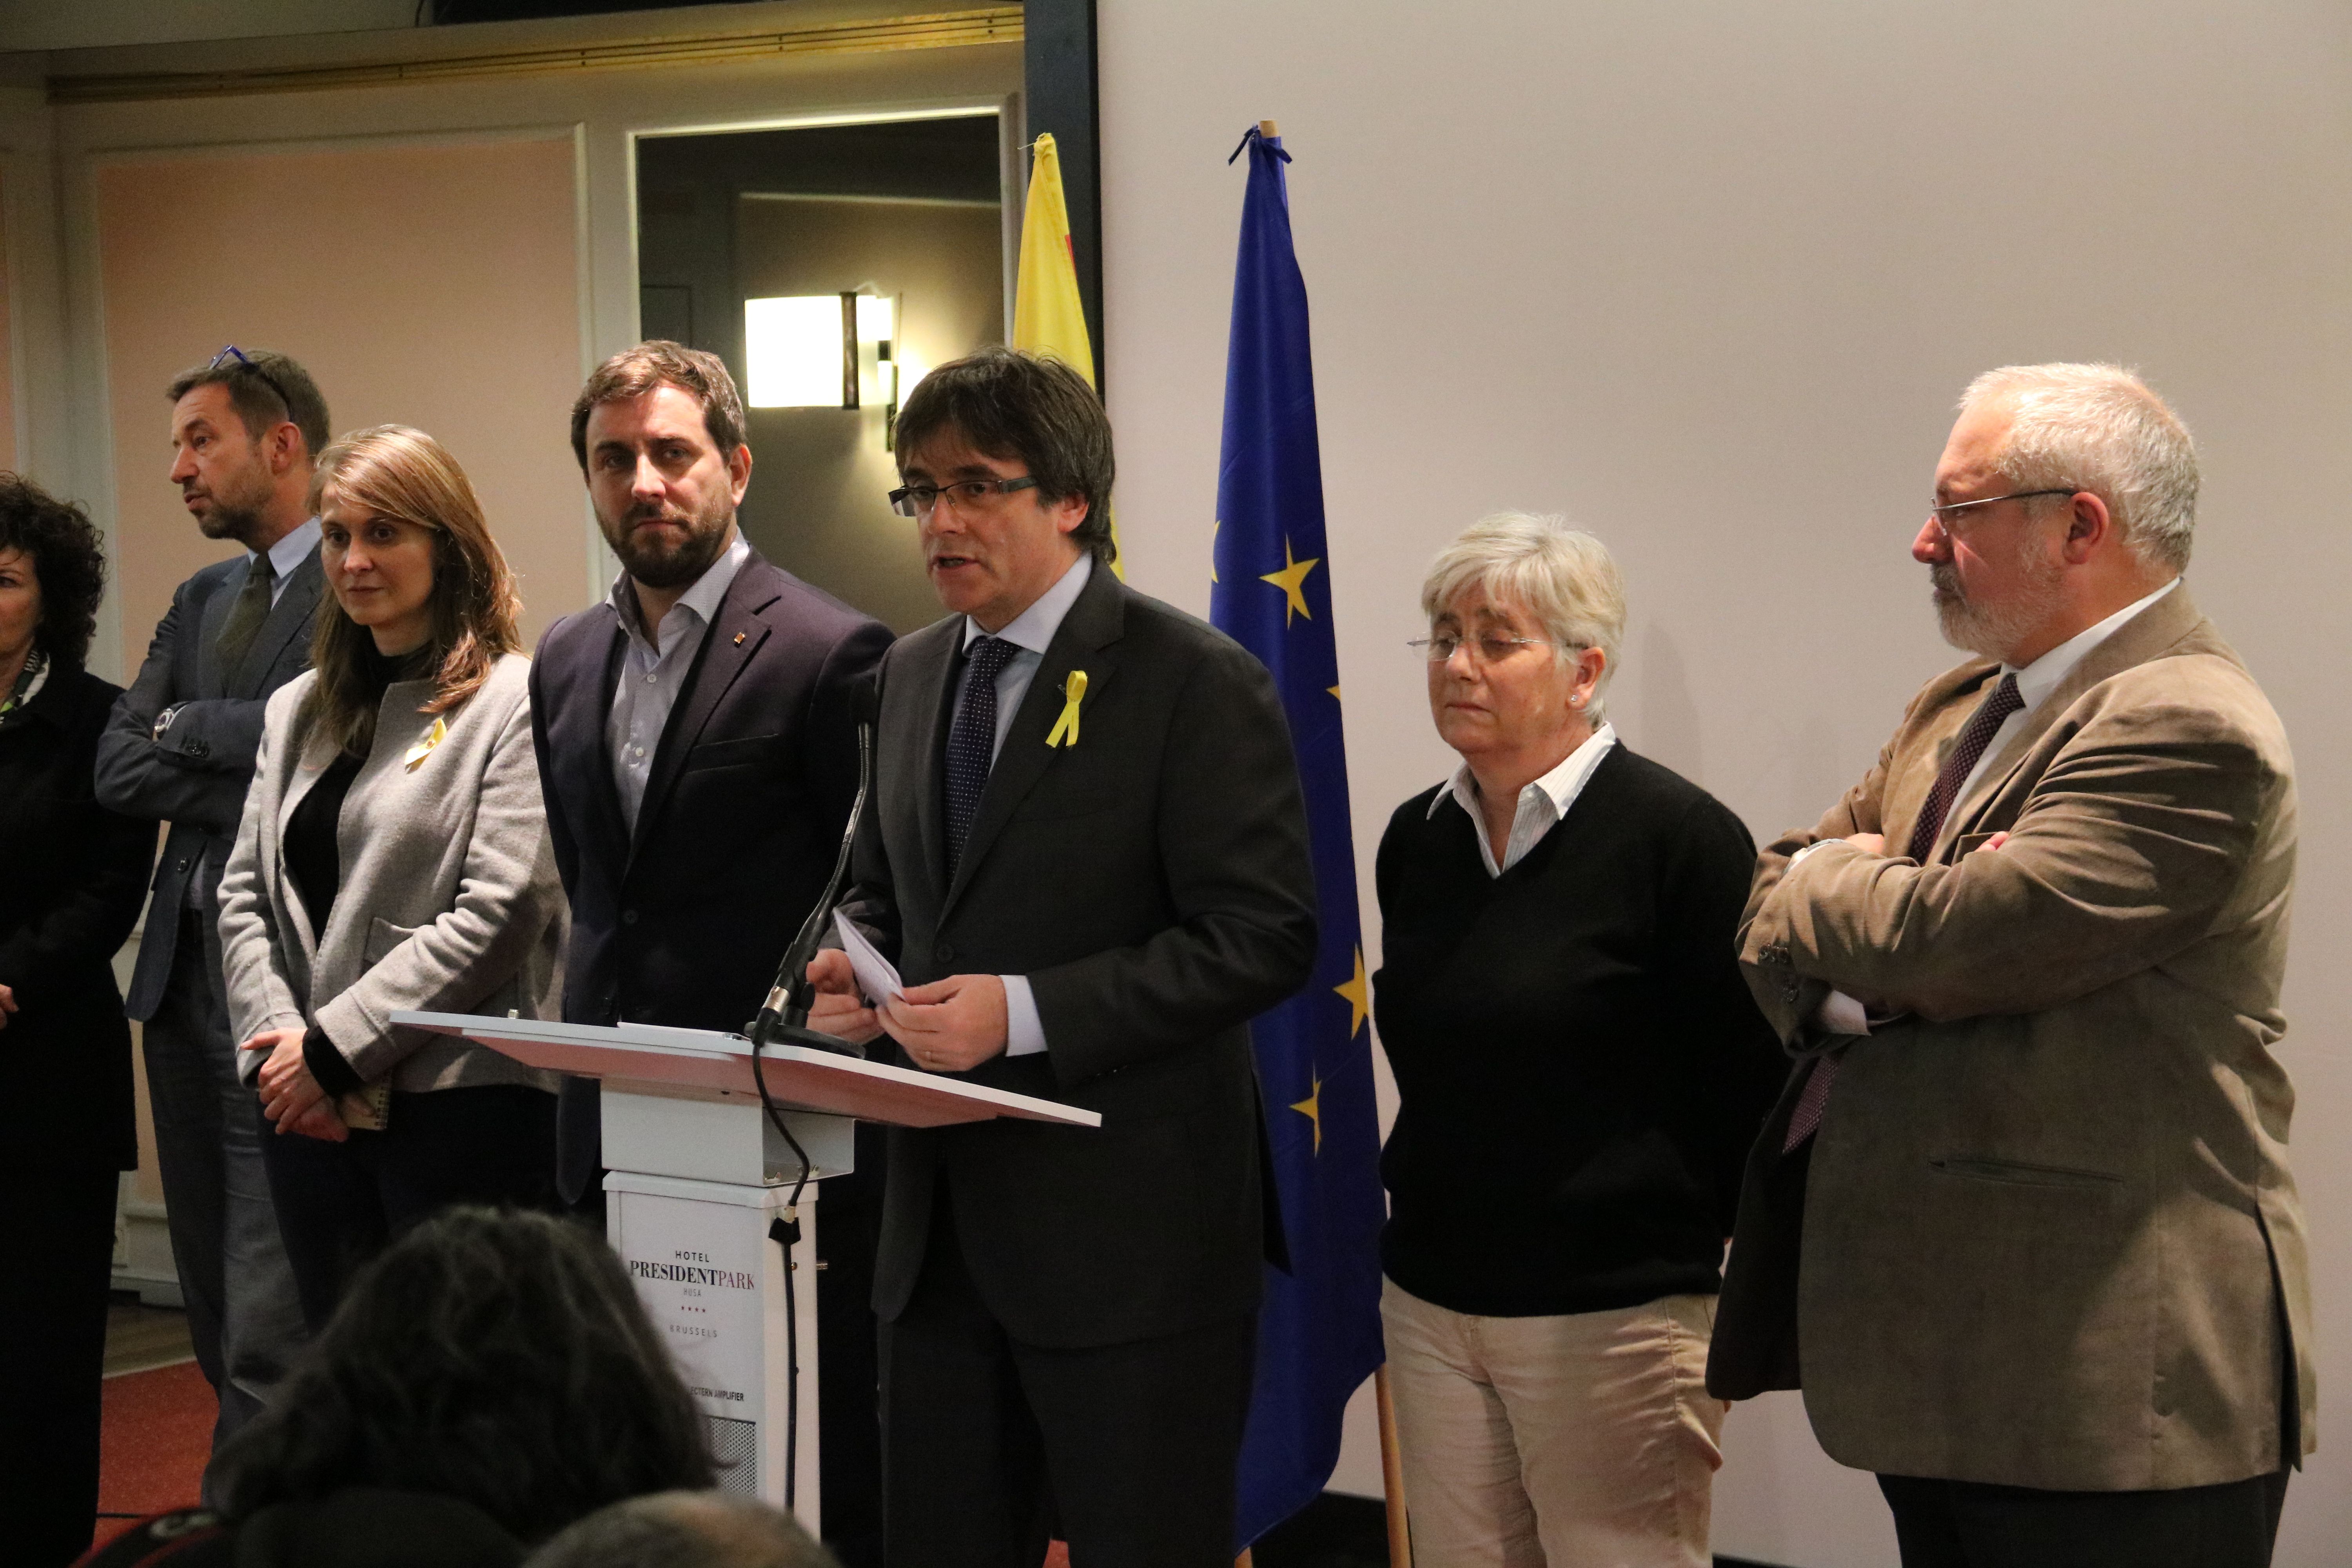 Catalan president Carles Puigdemont (center) with ministers Meritxell Serret, Toni Comín, Clara Ponsatí and Lluís Puig (by Laura Pous)